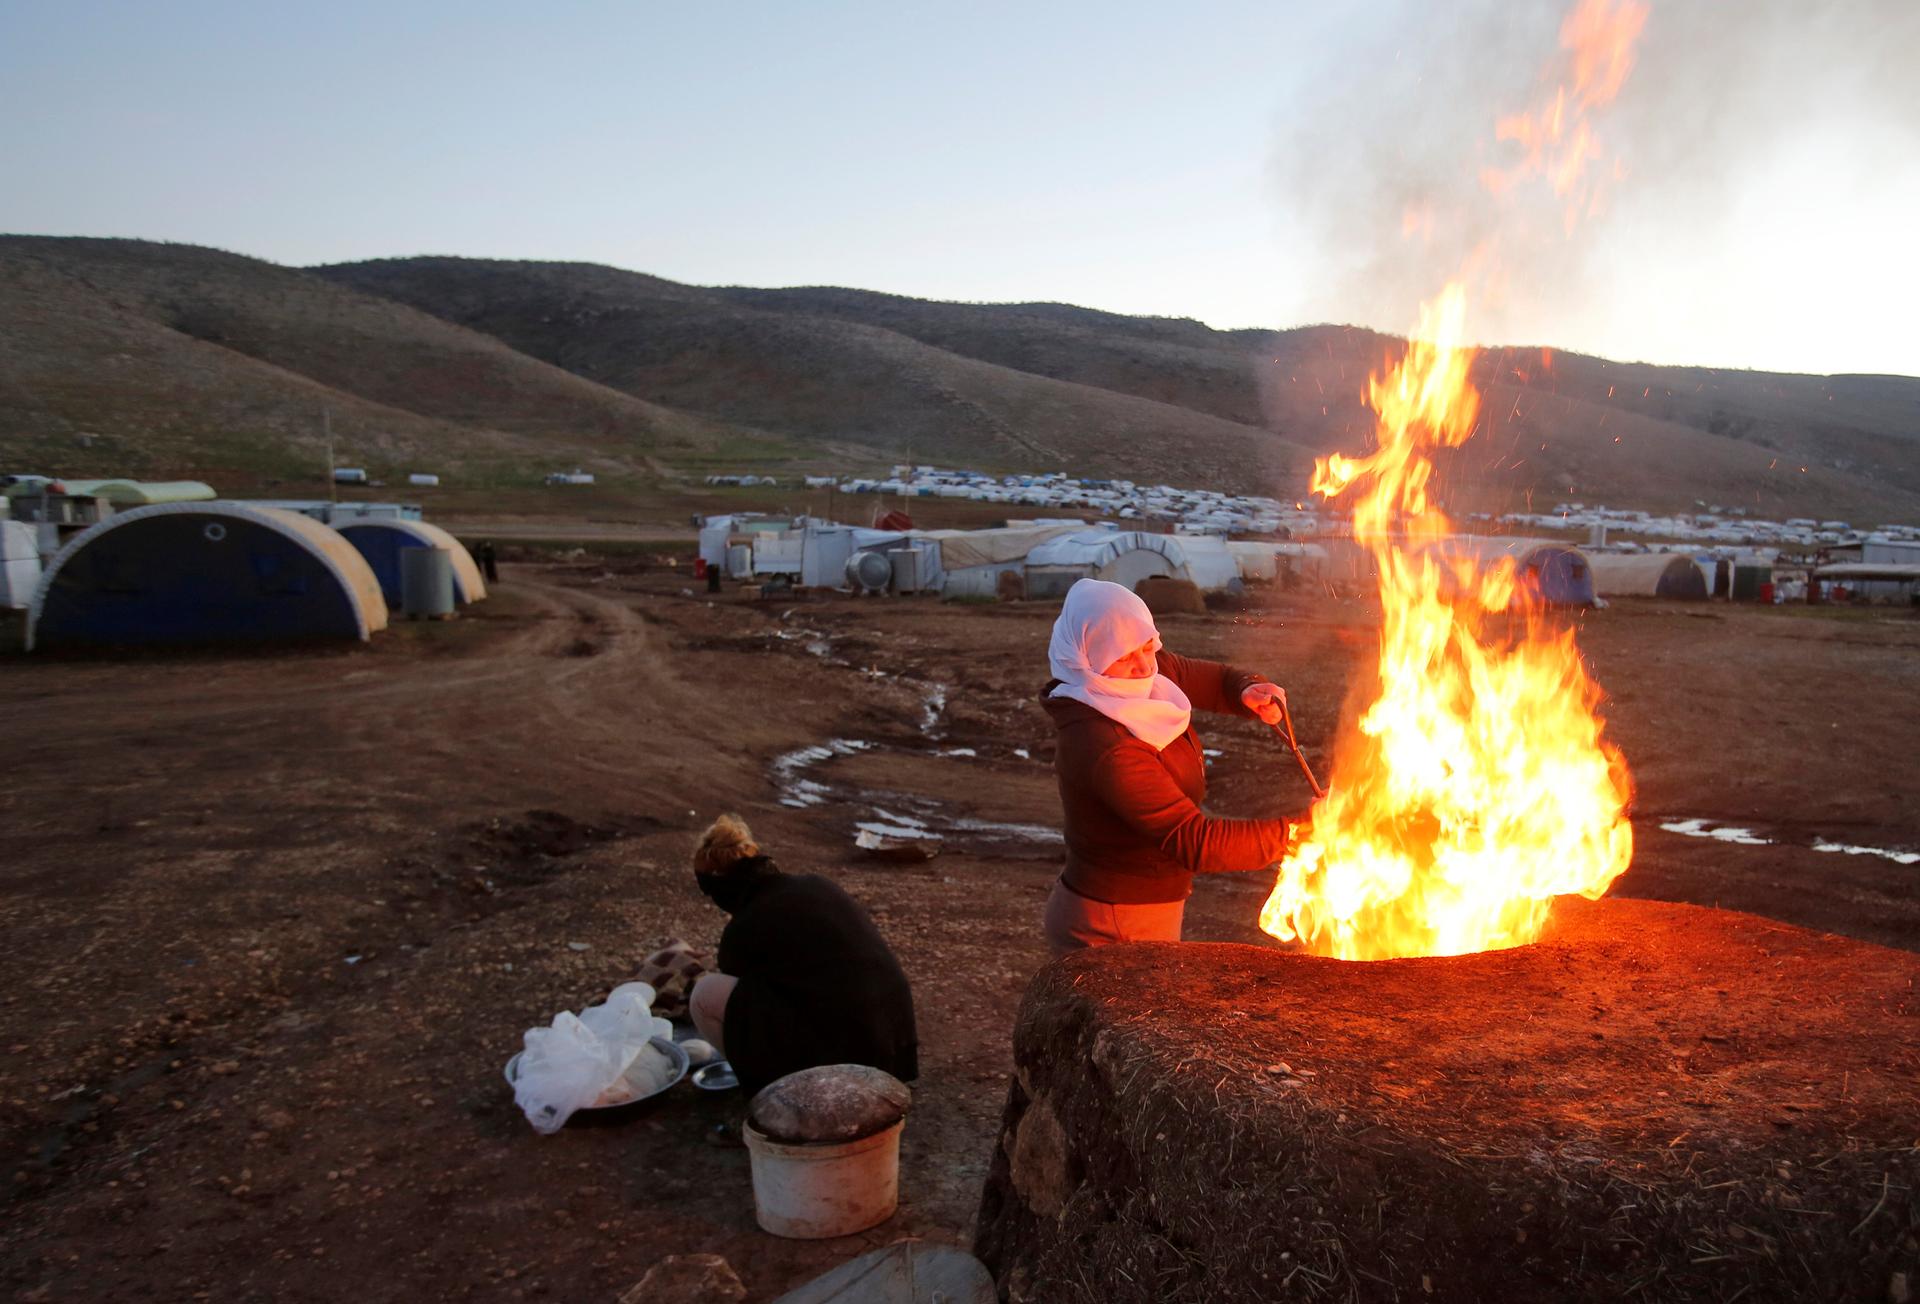 A woman prepares bread with huge fire at refugee camp near white tents.